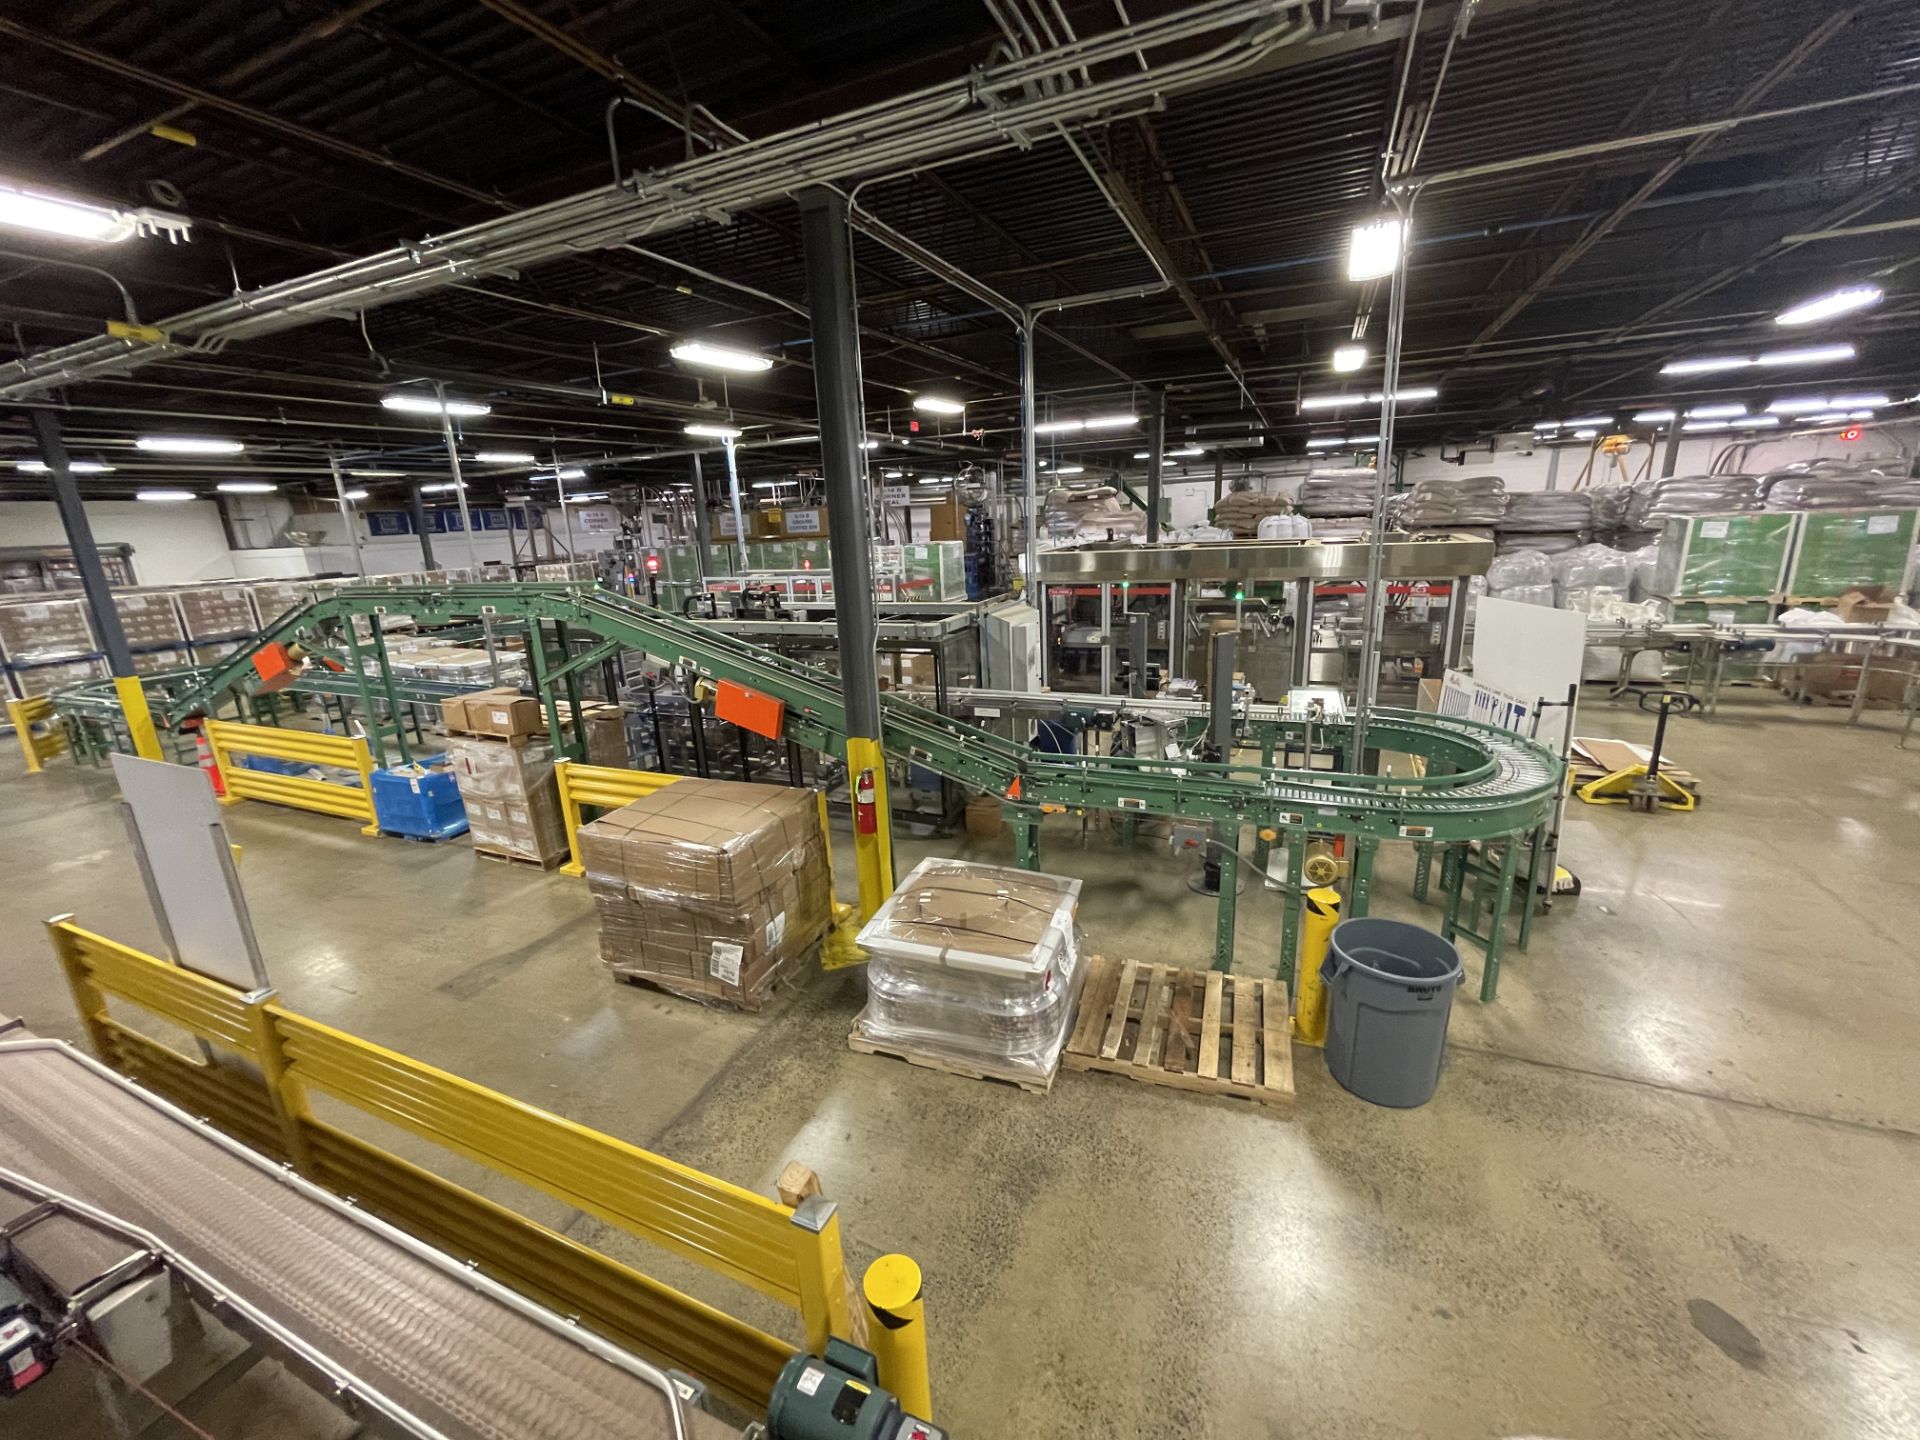 CASE CONVEYOR SYSTEMS ON PRODUCTION LINE (2019 MFG) (Loading, Handling & Site Management Fee: $